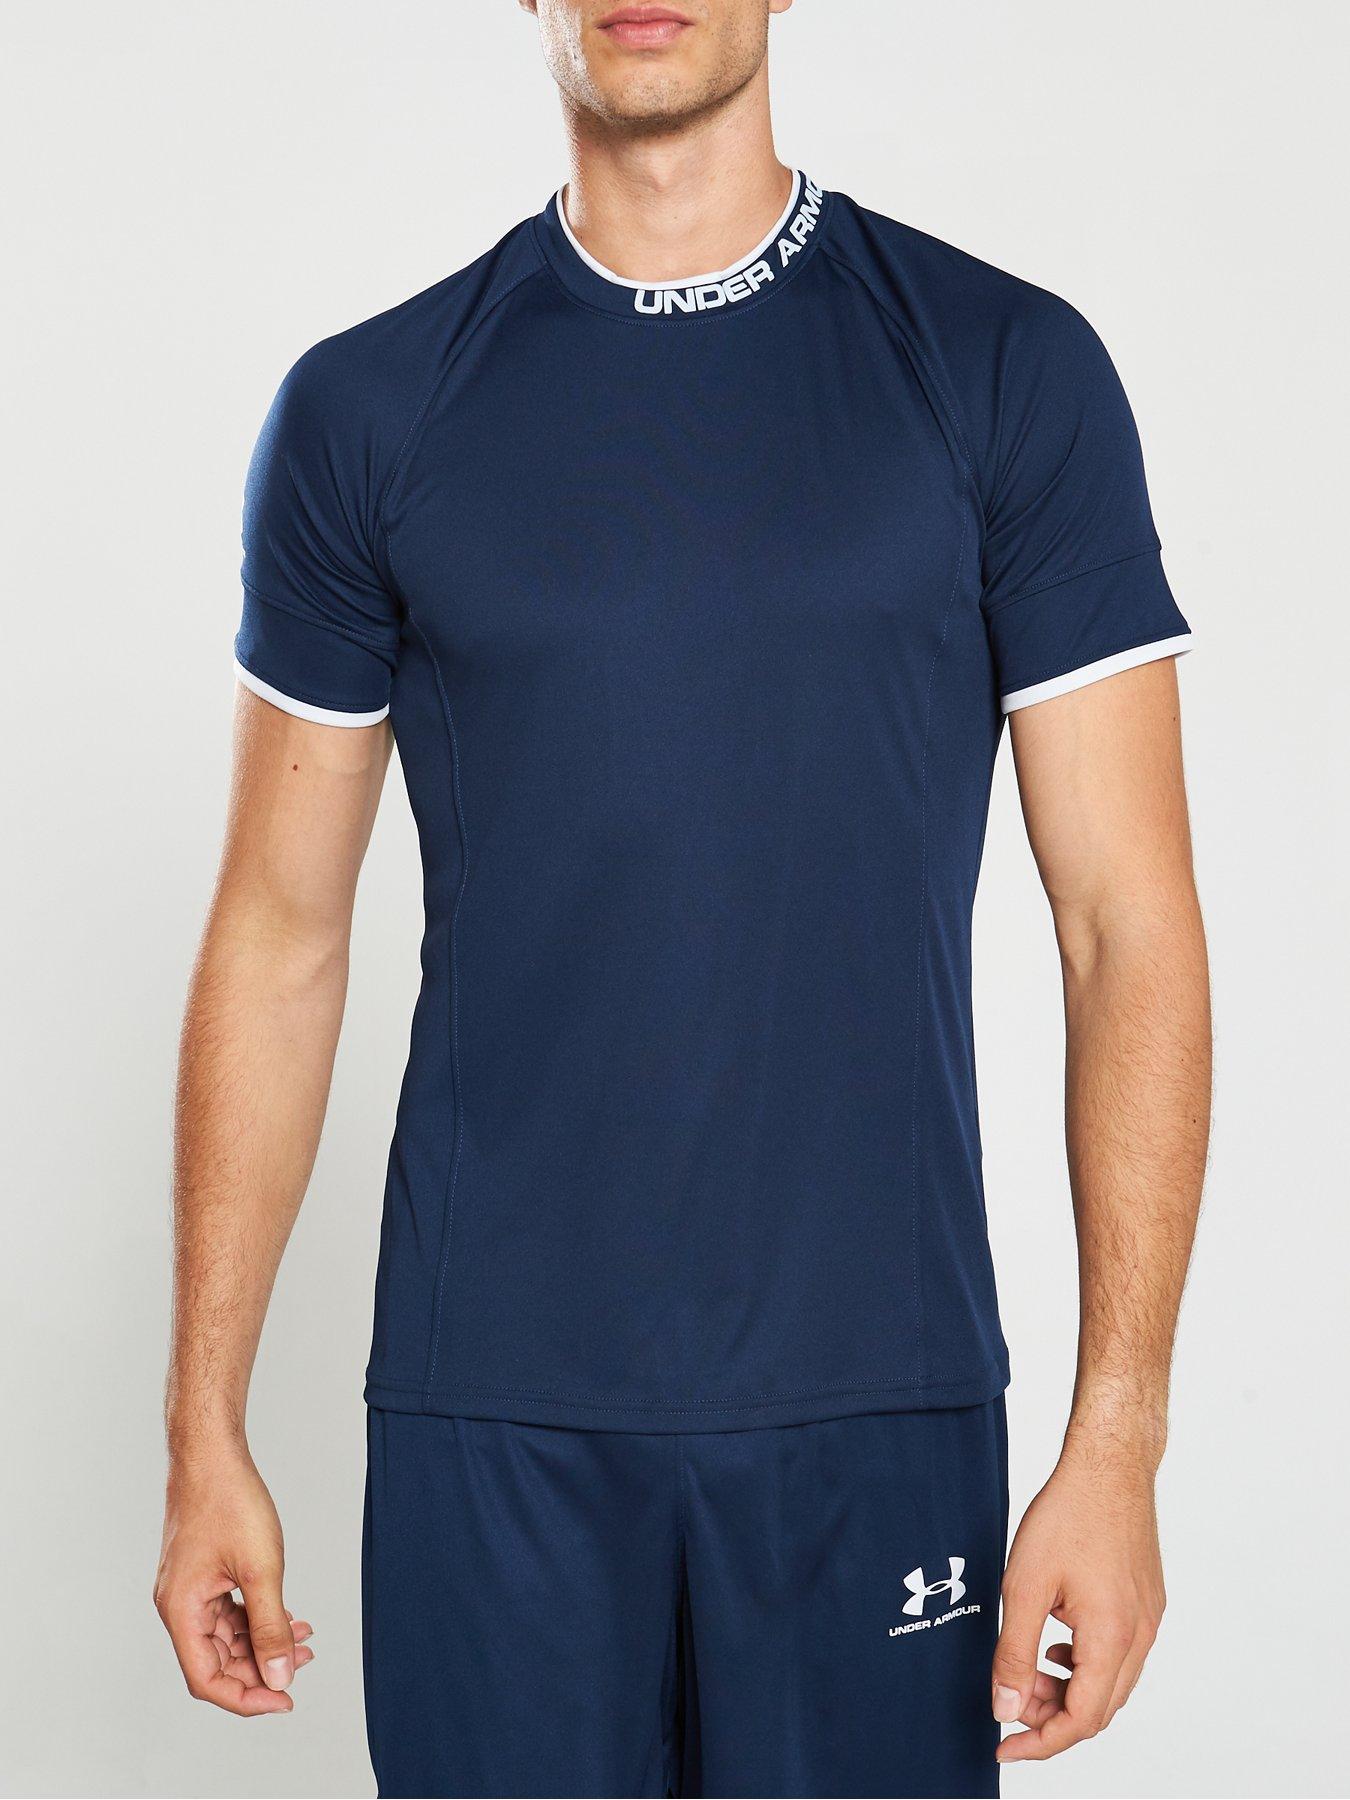 T-shirt Under Armour Challenger Training Top-NVY 